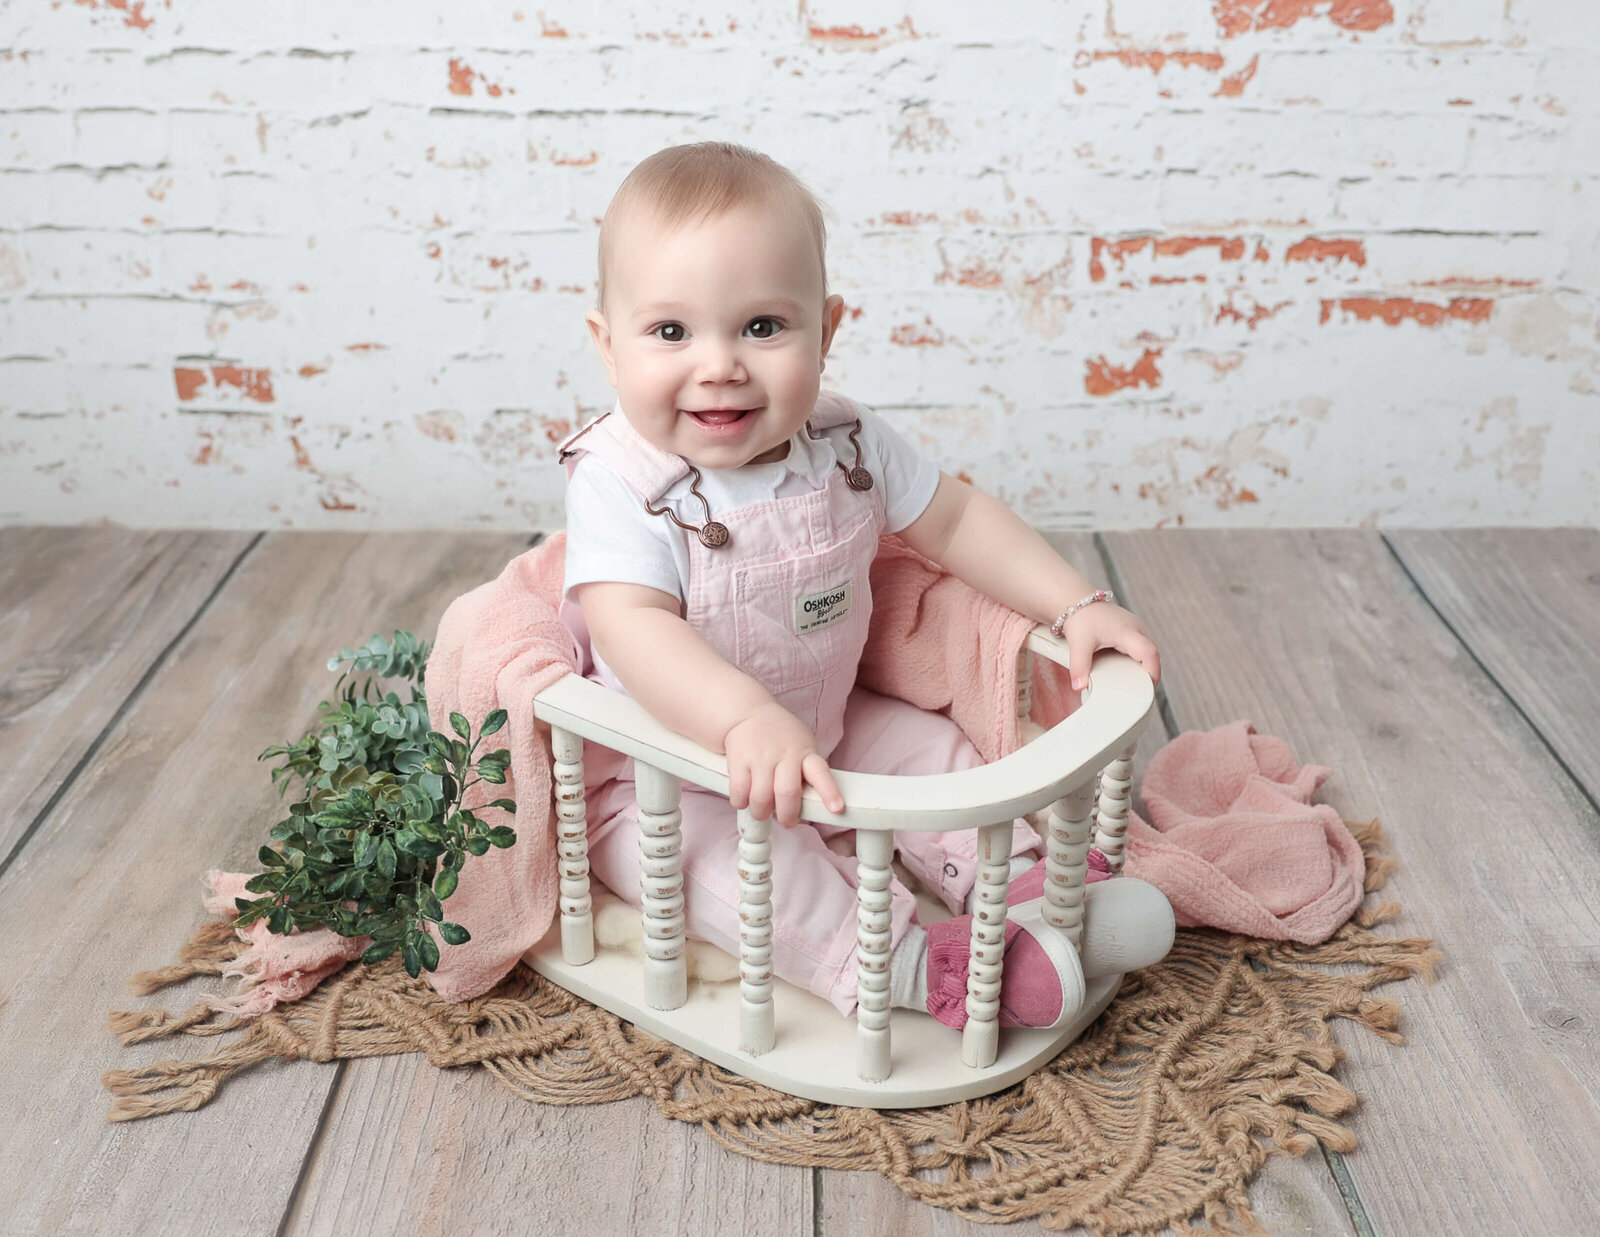 Adorable 6 month old smiling in a basket at our studio in Rochester, NY.